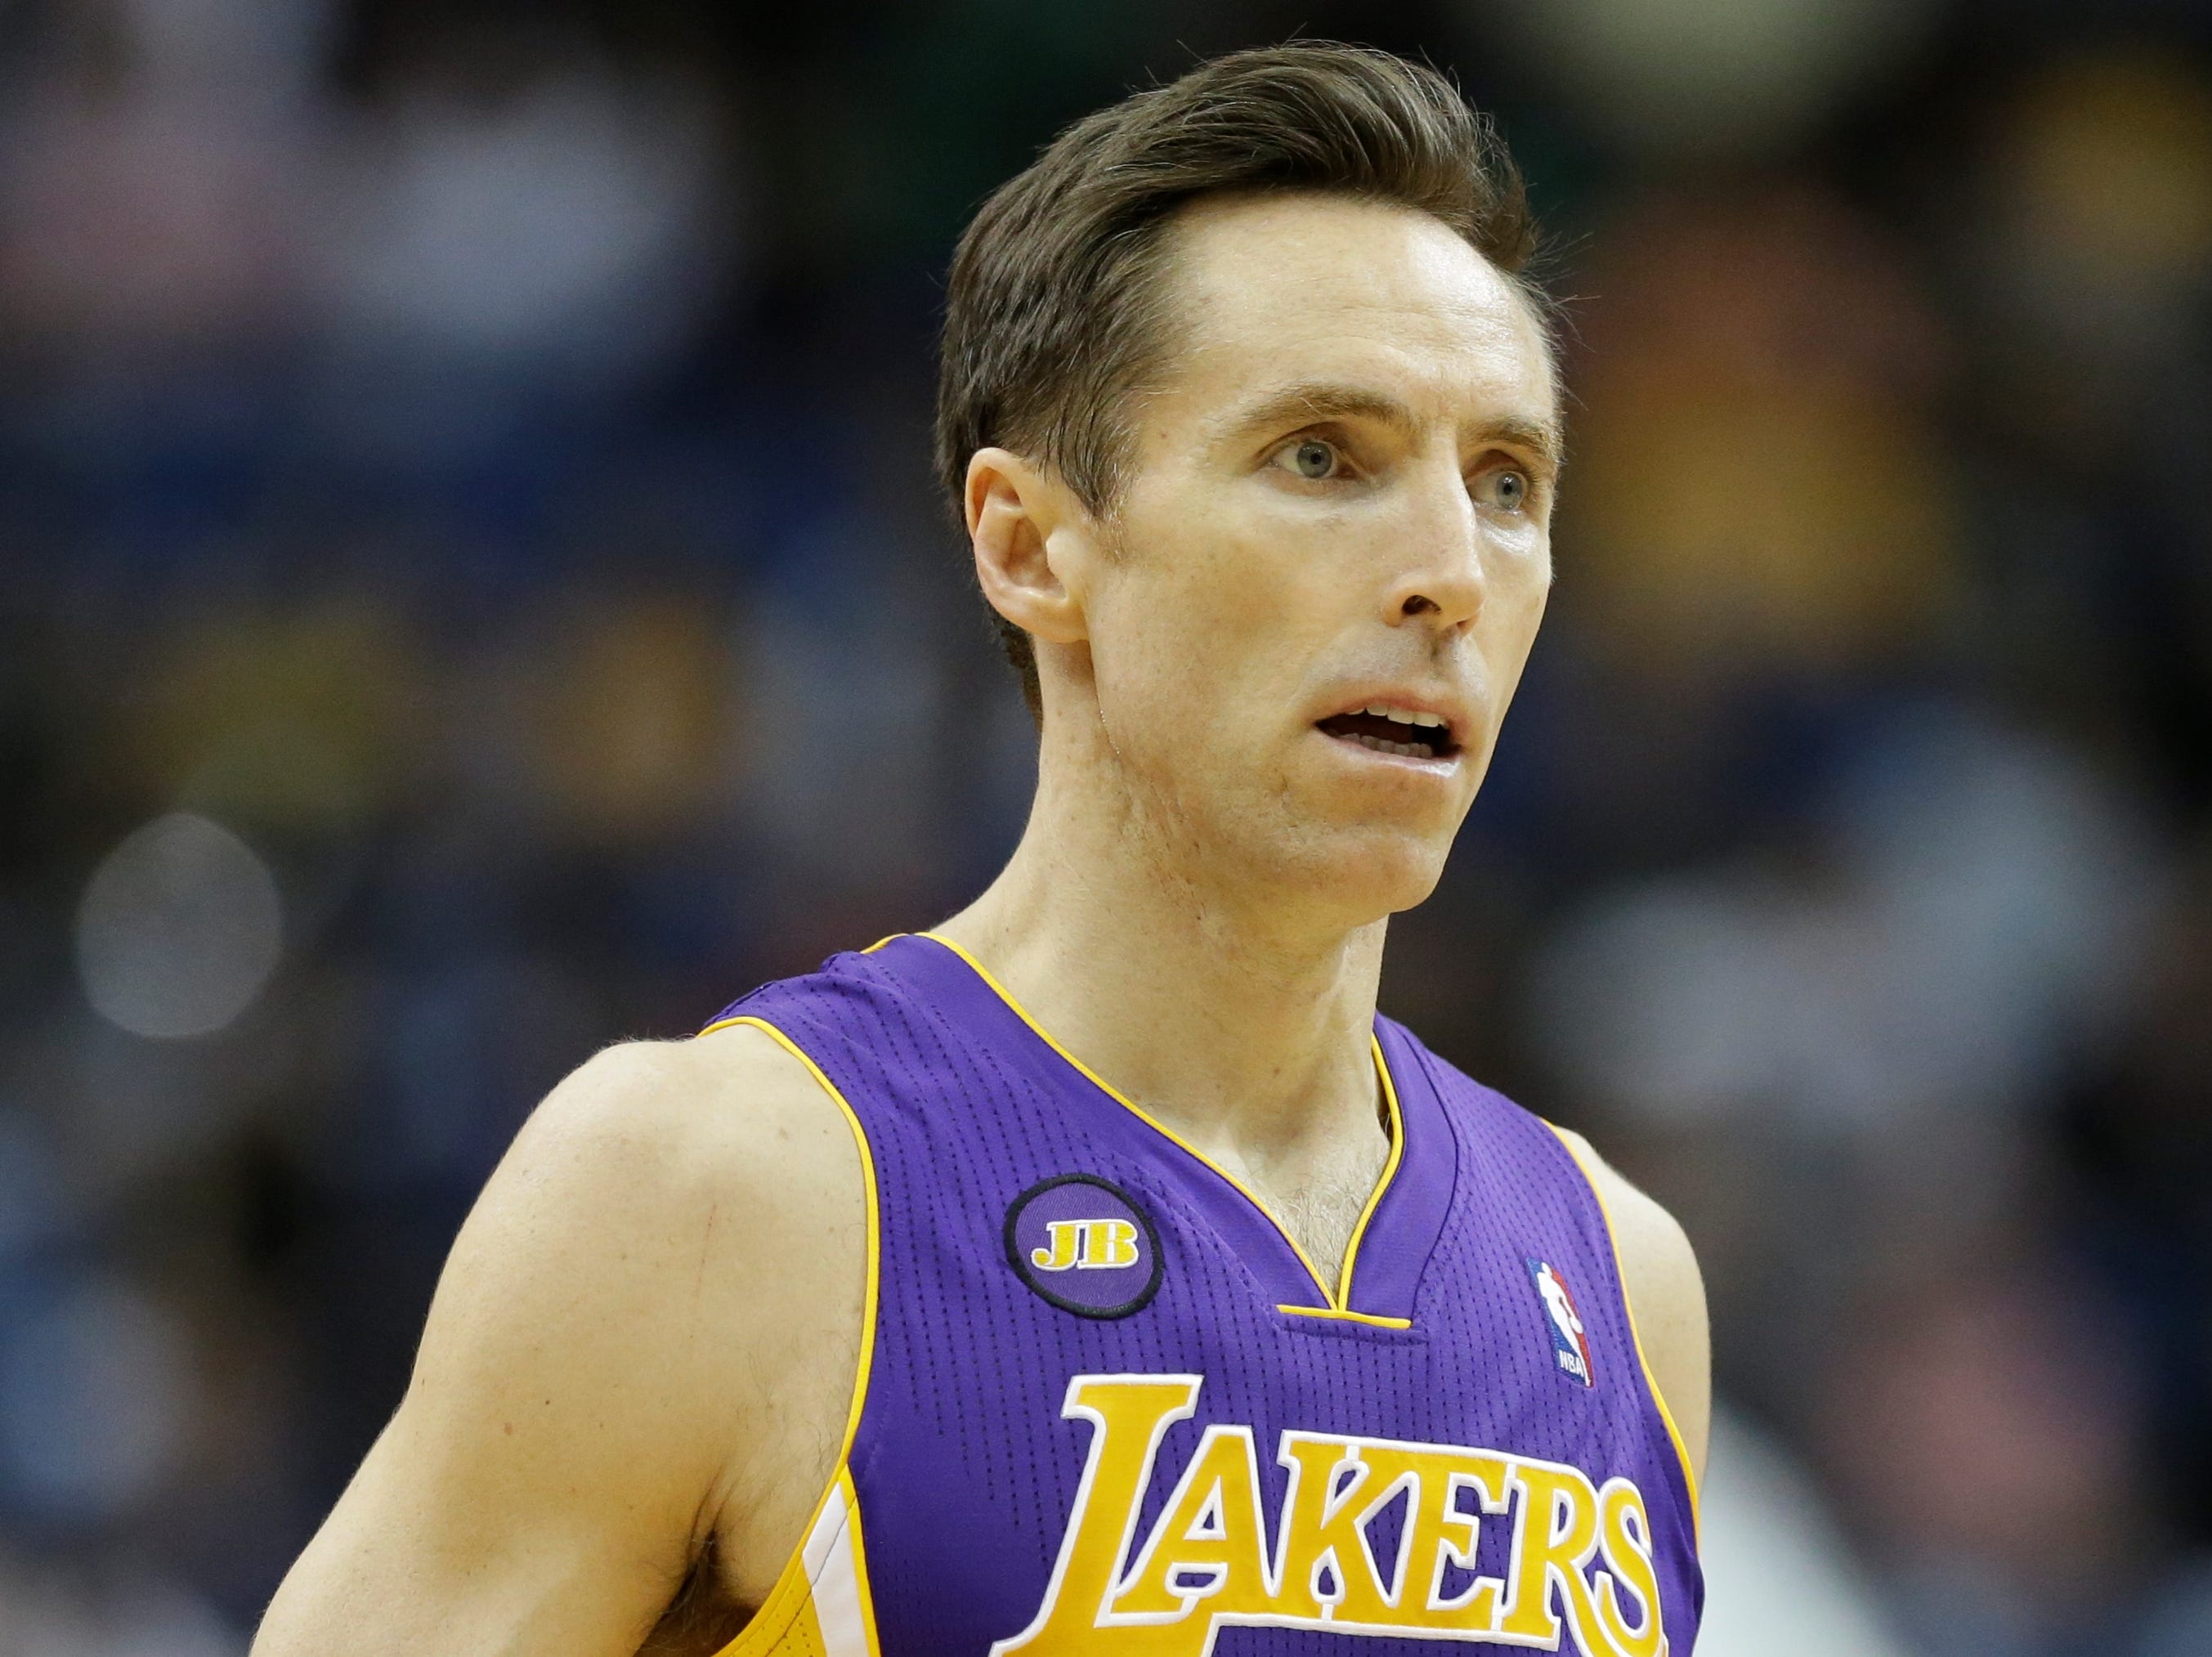 Steve Nash fights to keep ex-wife from moving to Calif.